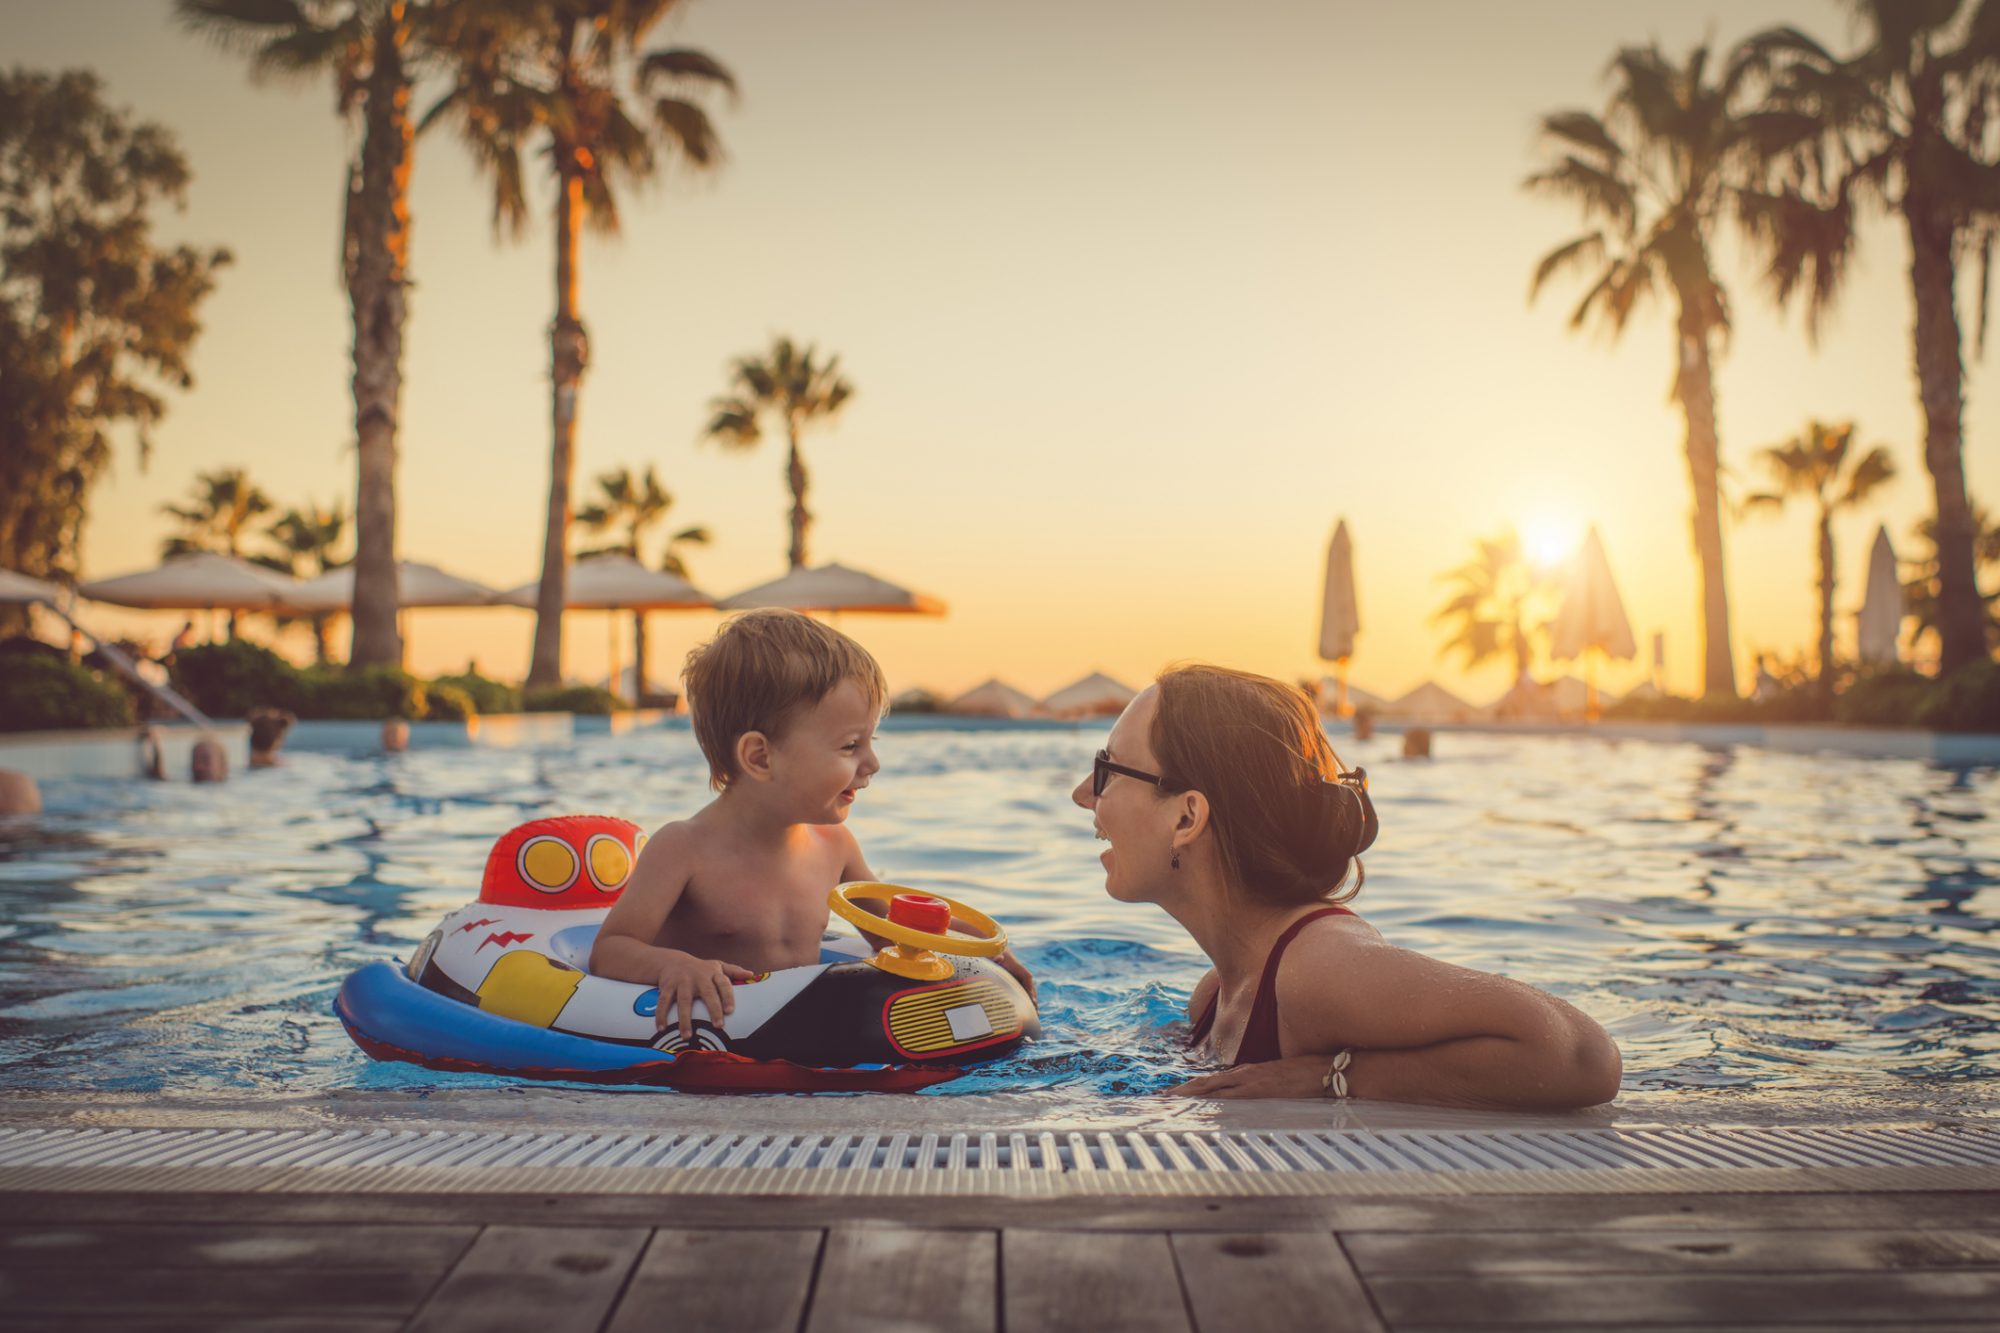 An image of a boy and his mother in a pool at a resort.